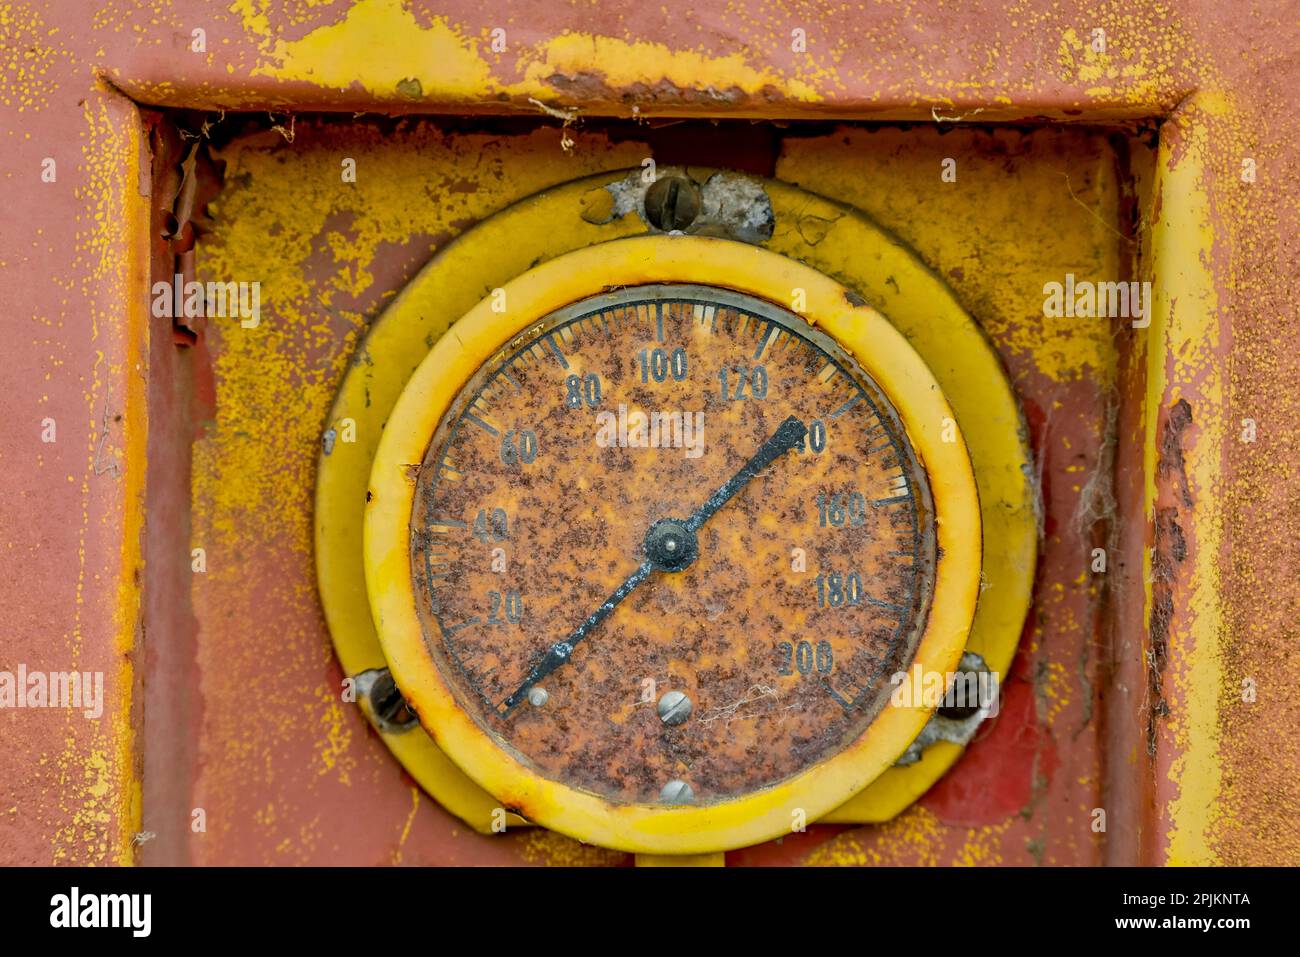 USA, Oregon, Tillamook. Old fire truck with gauges and valves with colorful pealing paint Stock Photo